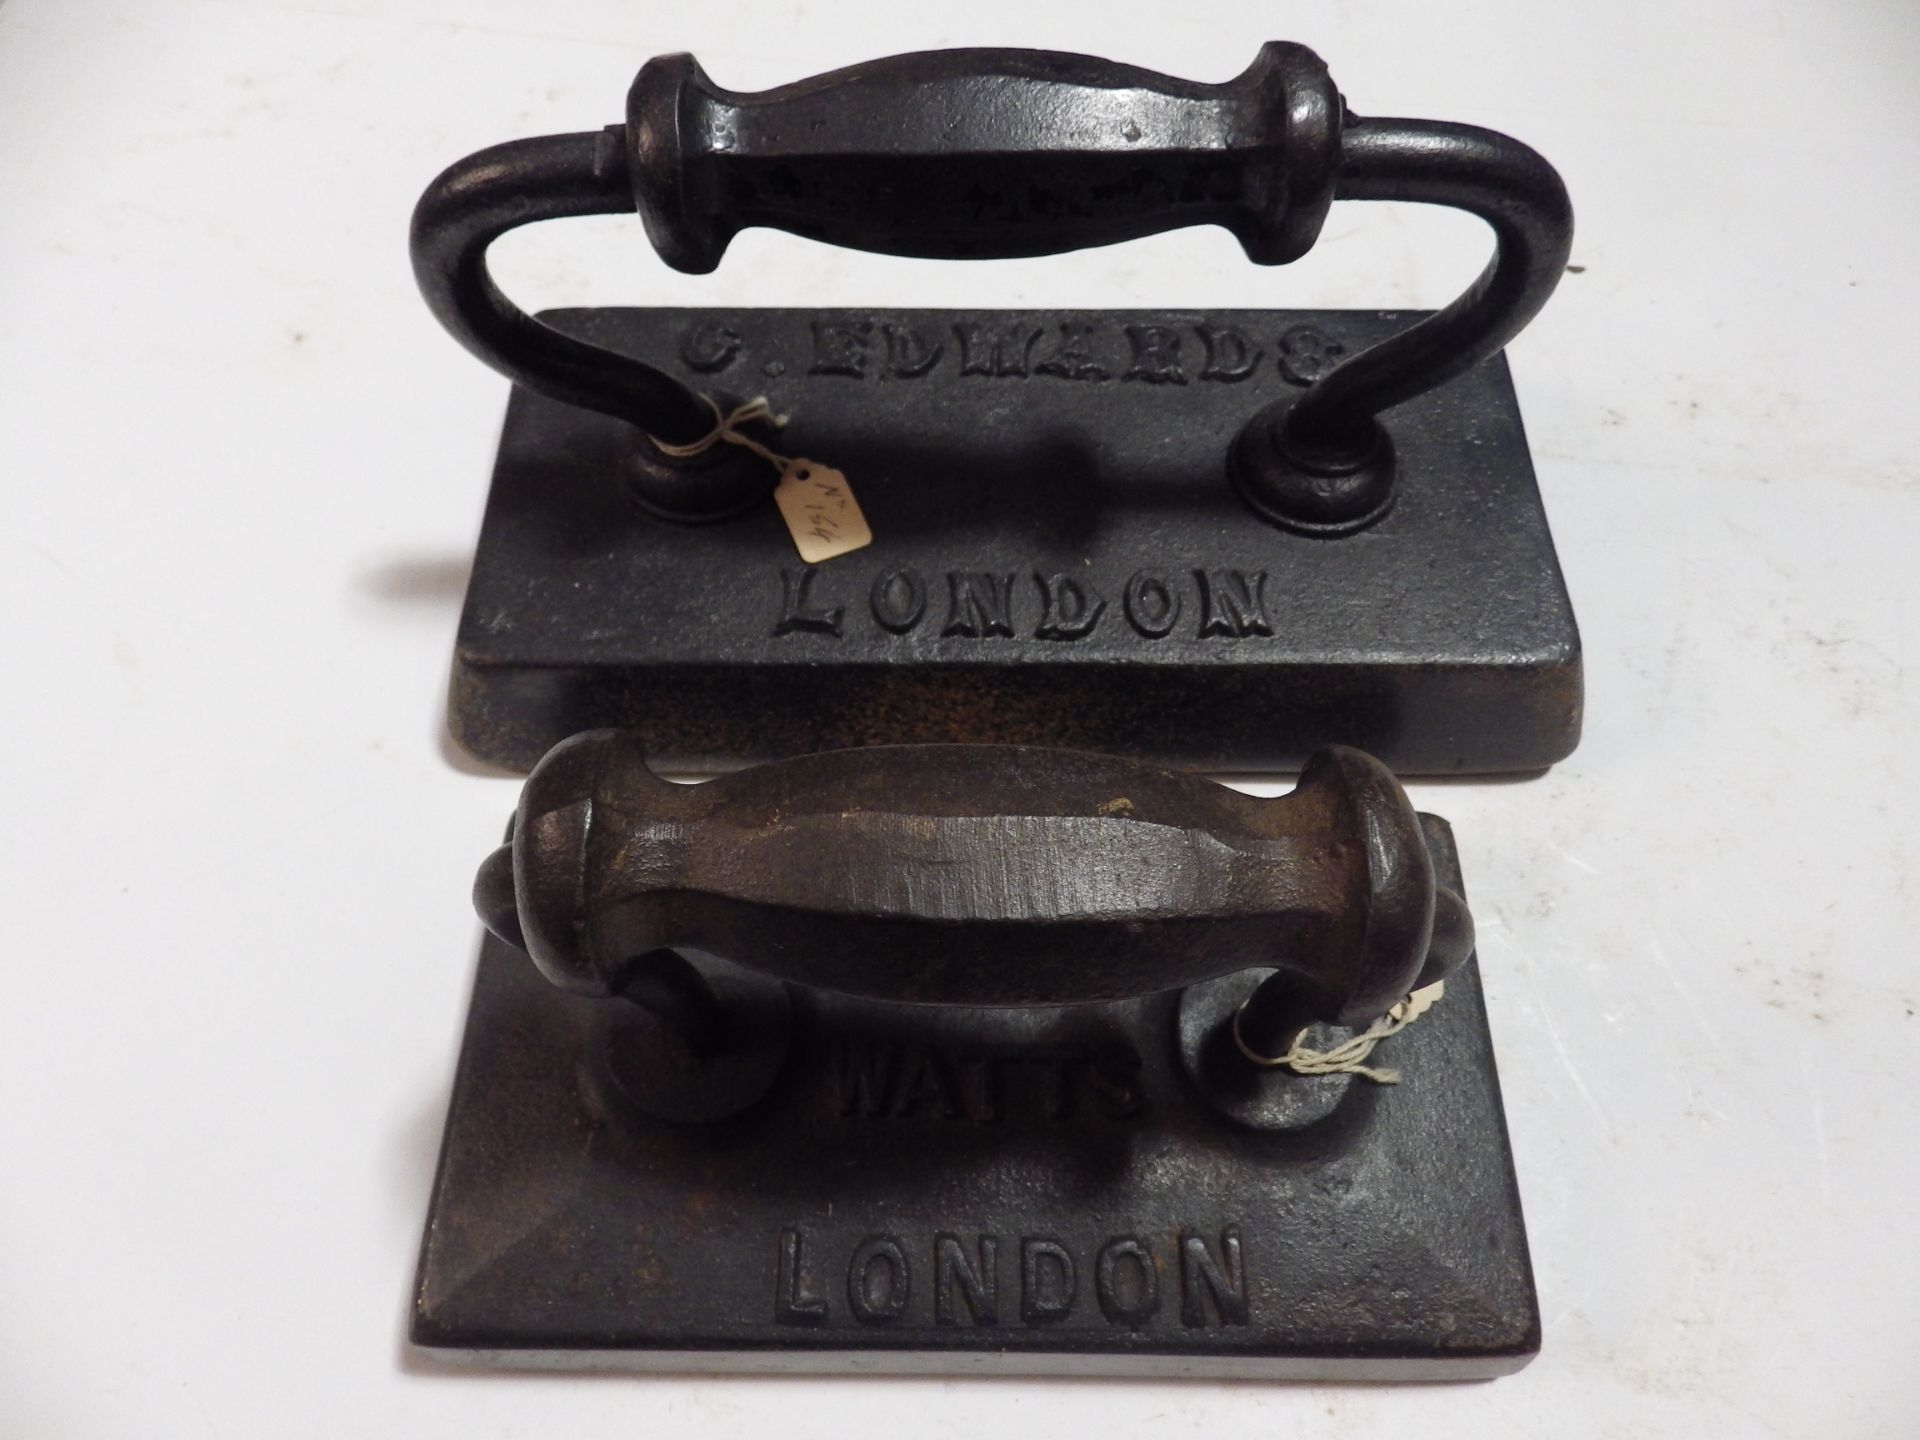 2 Billiard table irons - G Edwards London and Burroughes & Watts London - Image 2 of 2